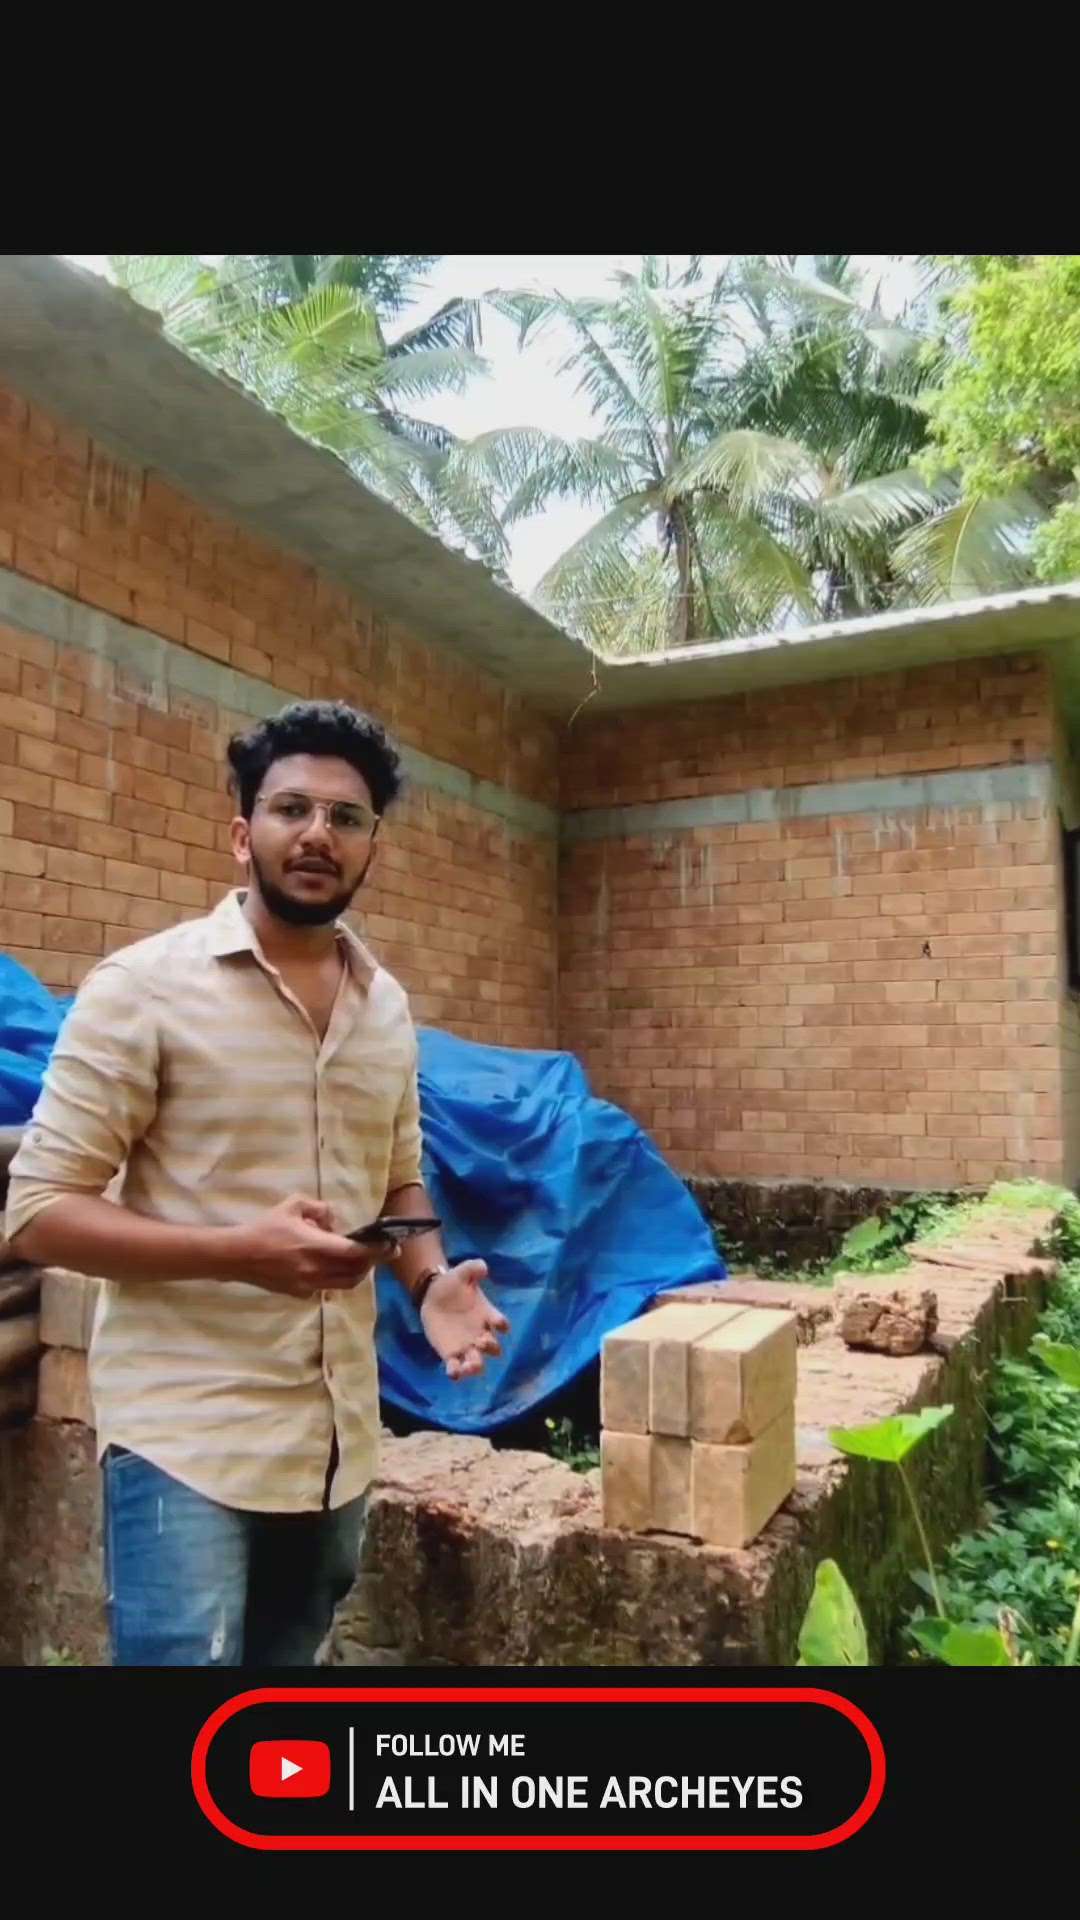 Cement Interlocking Brick low cost വീട് - All In One Archeyes youtube channel❤️ #HouseRenovation #Residencedesign 
 #residenceproject #residentialbuilding #HouseDesigns #50LakhHouse #ContemporaryHouse #SmallHouse #40LakhHouse #3500sqftHouse #HouseConstruction #HomeAutomation #ElevationHome #HomeDecor #homesweethome #homedecoration #homedesigne #MrHomeKerala #architecturedesigns #keralaarchitectures #architecturekerala #lowbudget #lowcosthouse #lowcost #lowcosthomes #lowcostconstruction #lowbudgethousekerala #budget_home_simple_interi #budgethouses